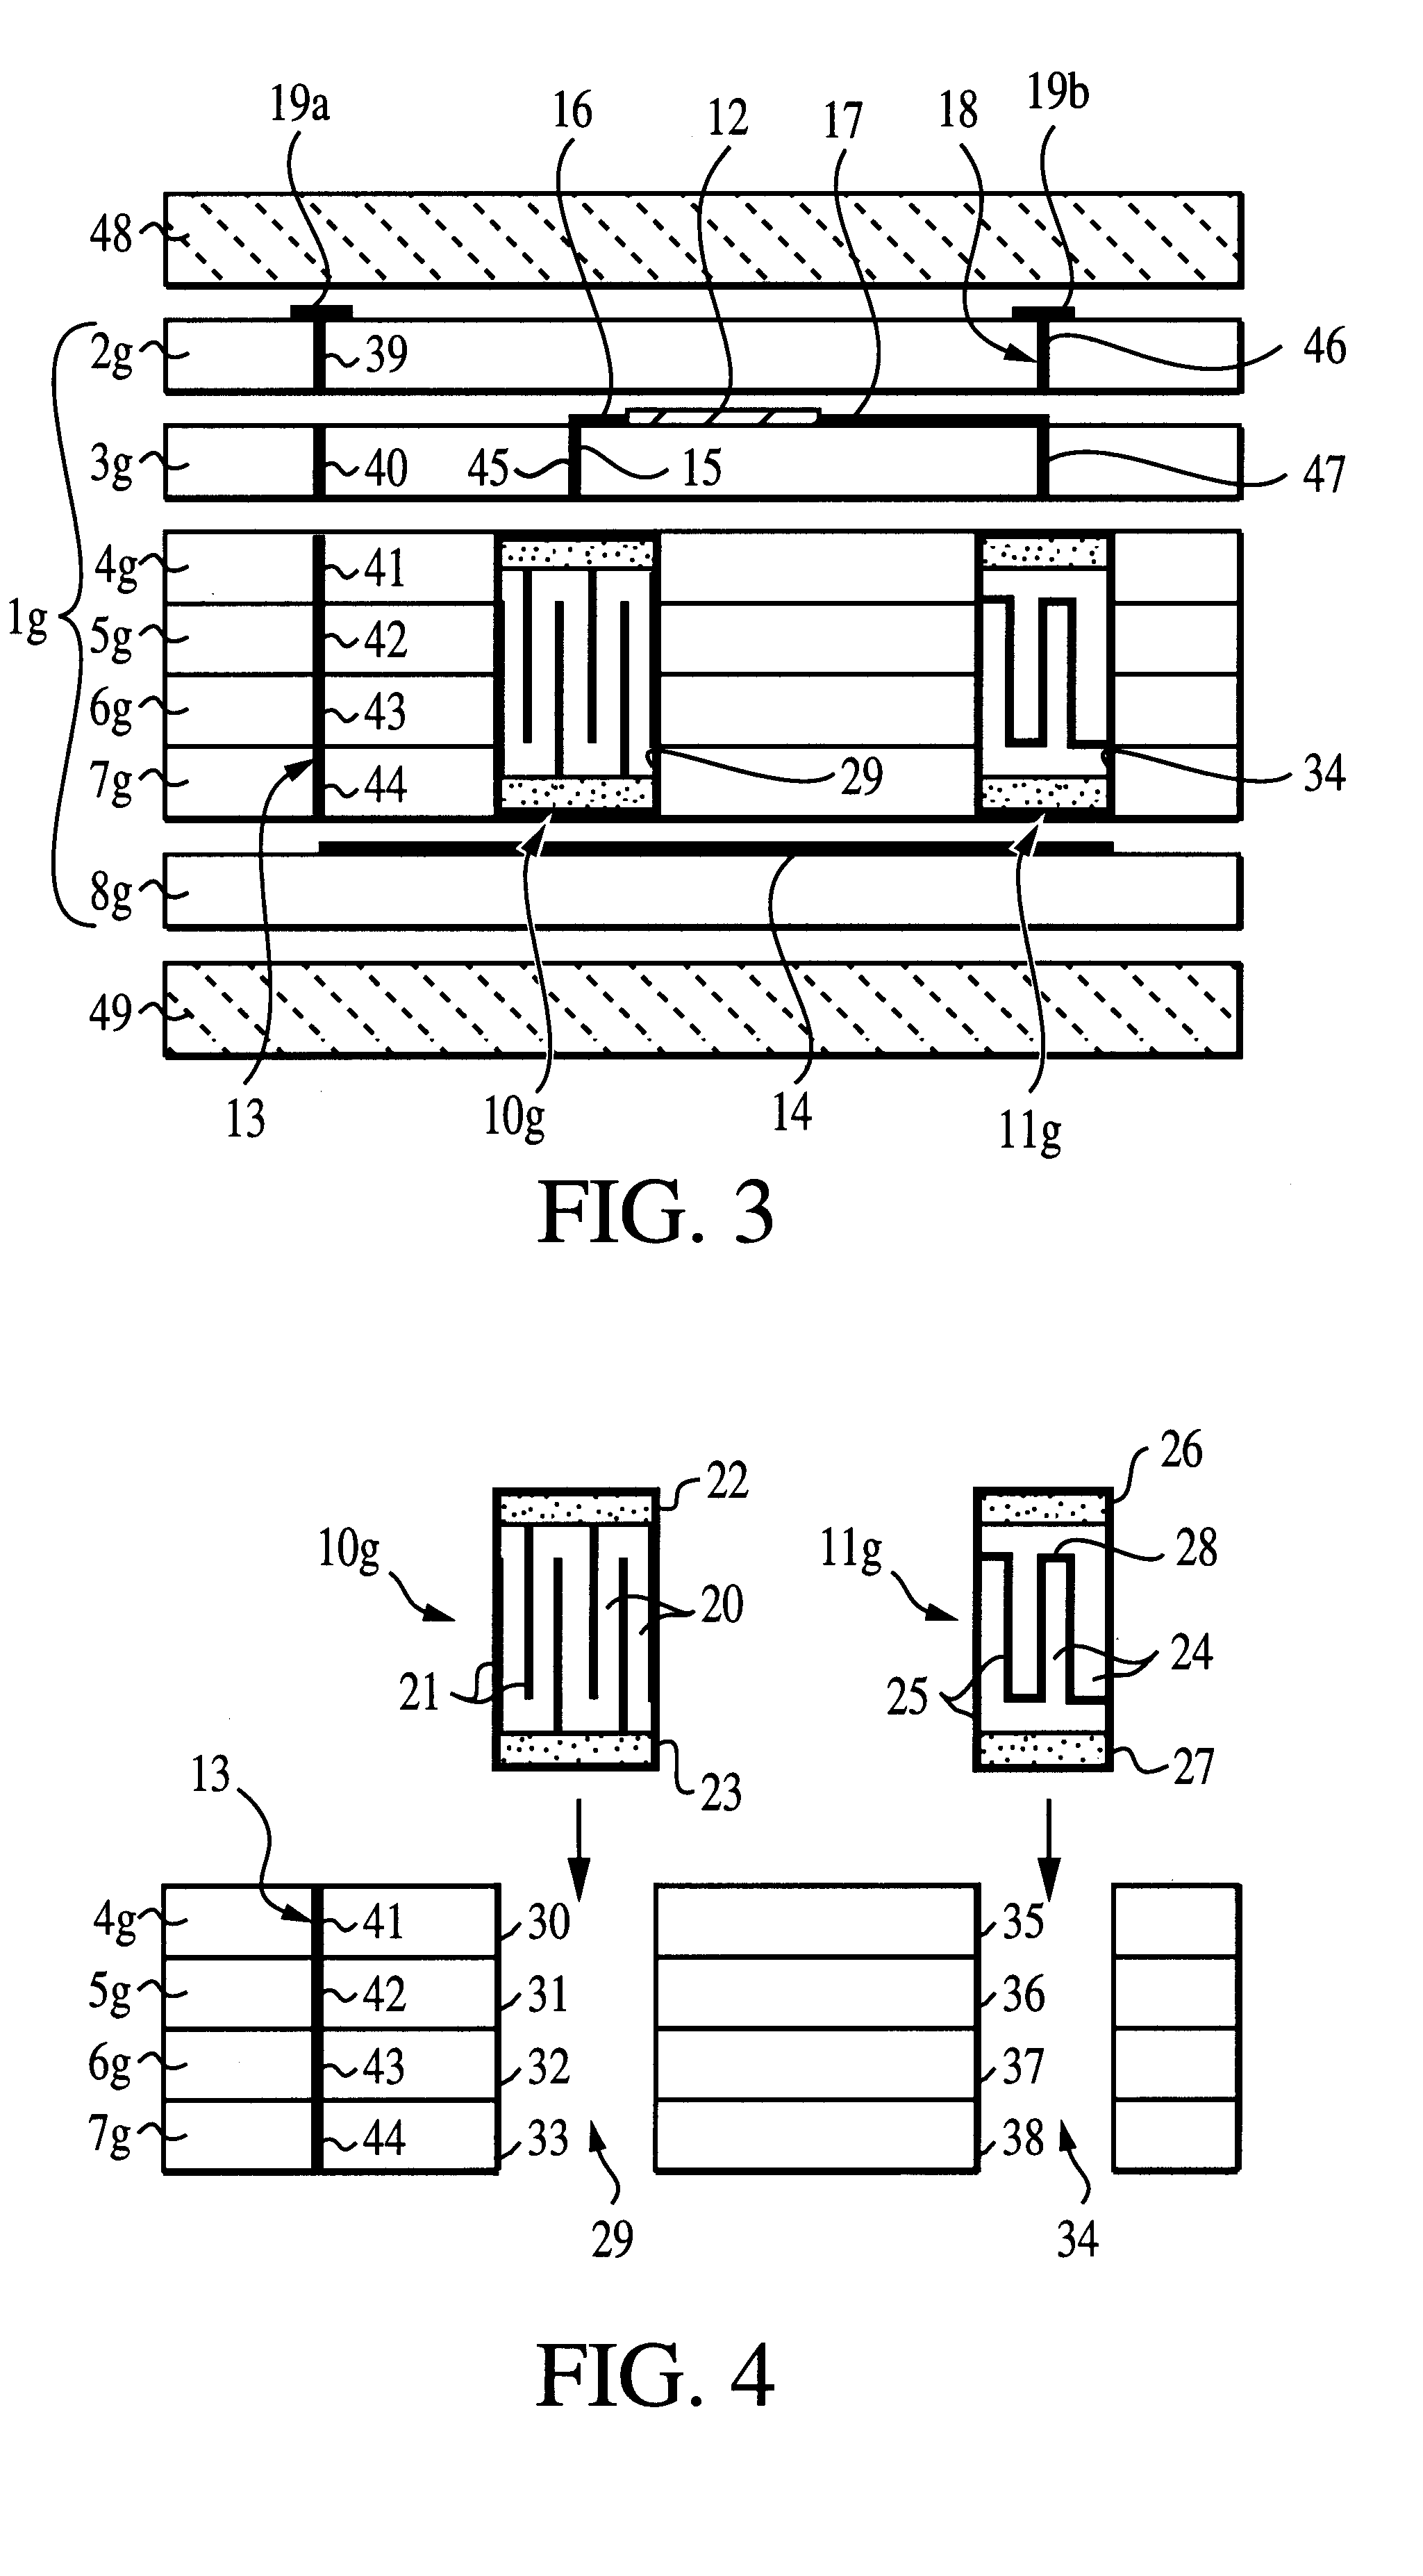 Method of producing a multi-layer ceramic substrate